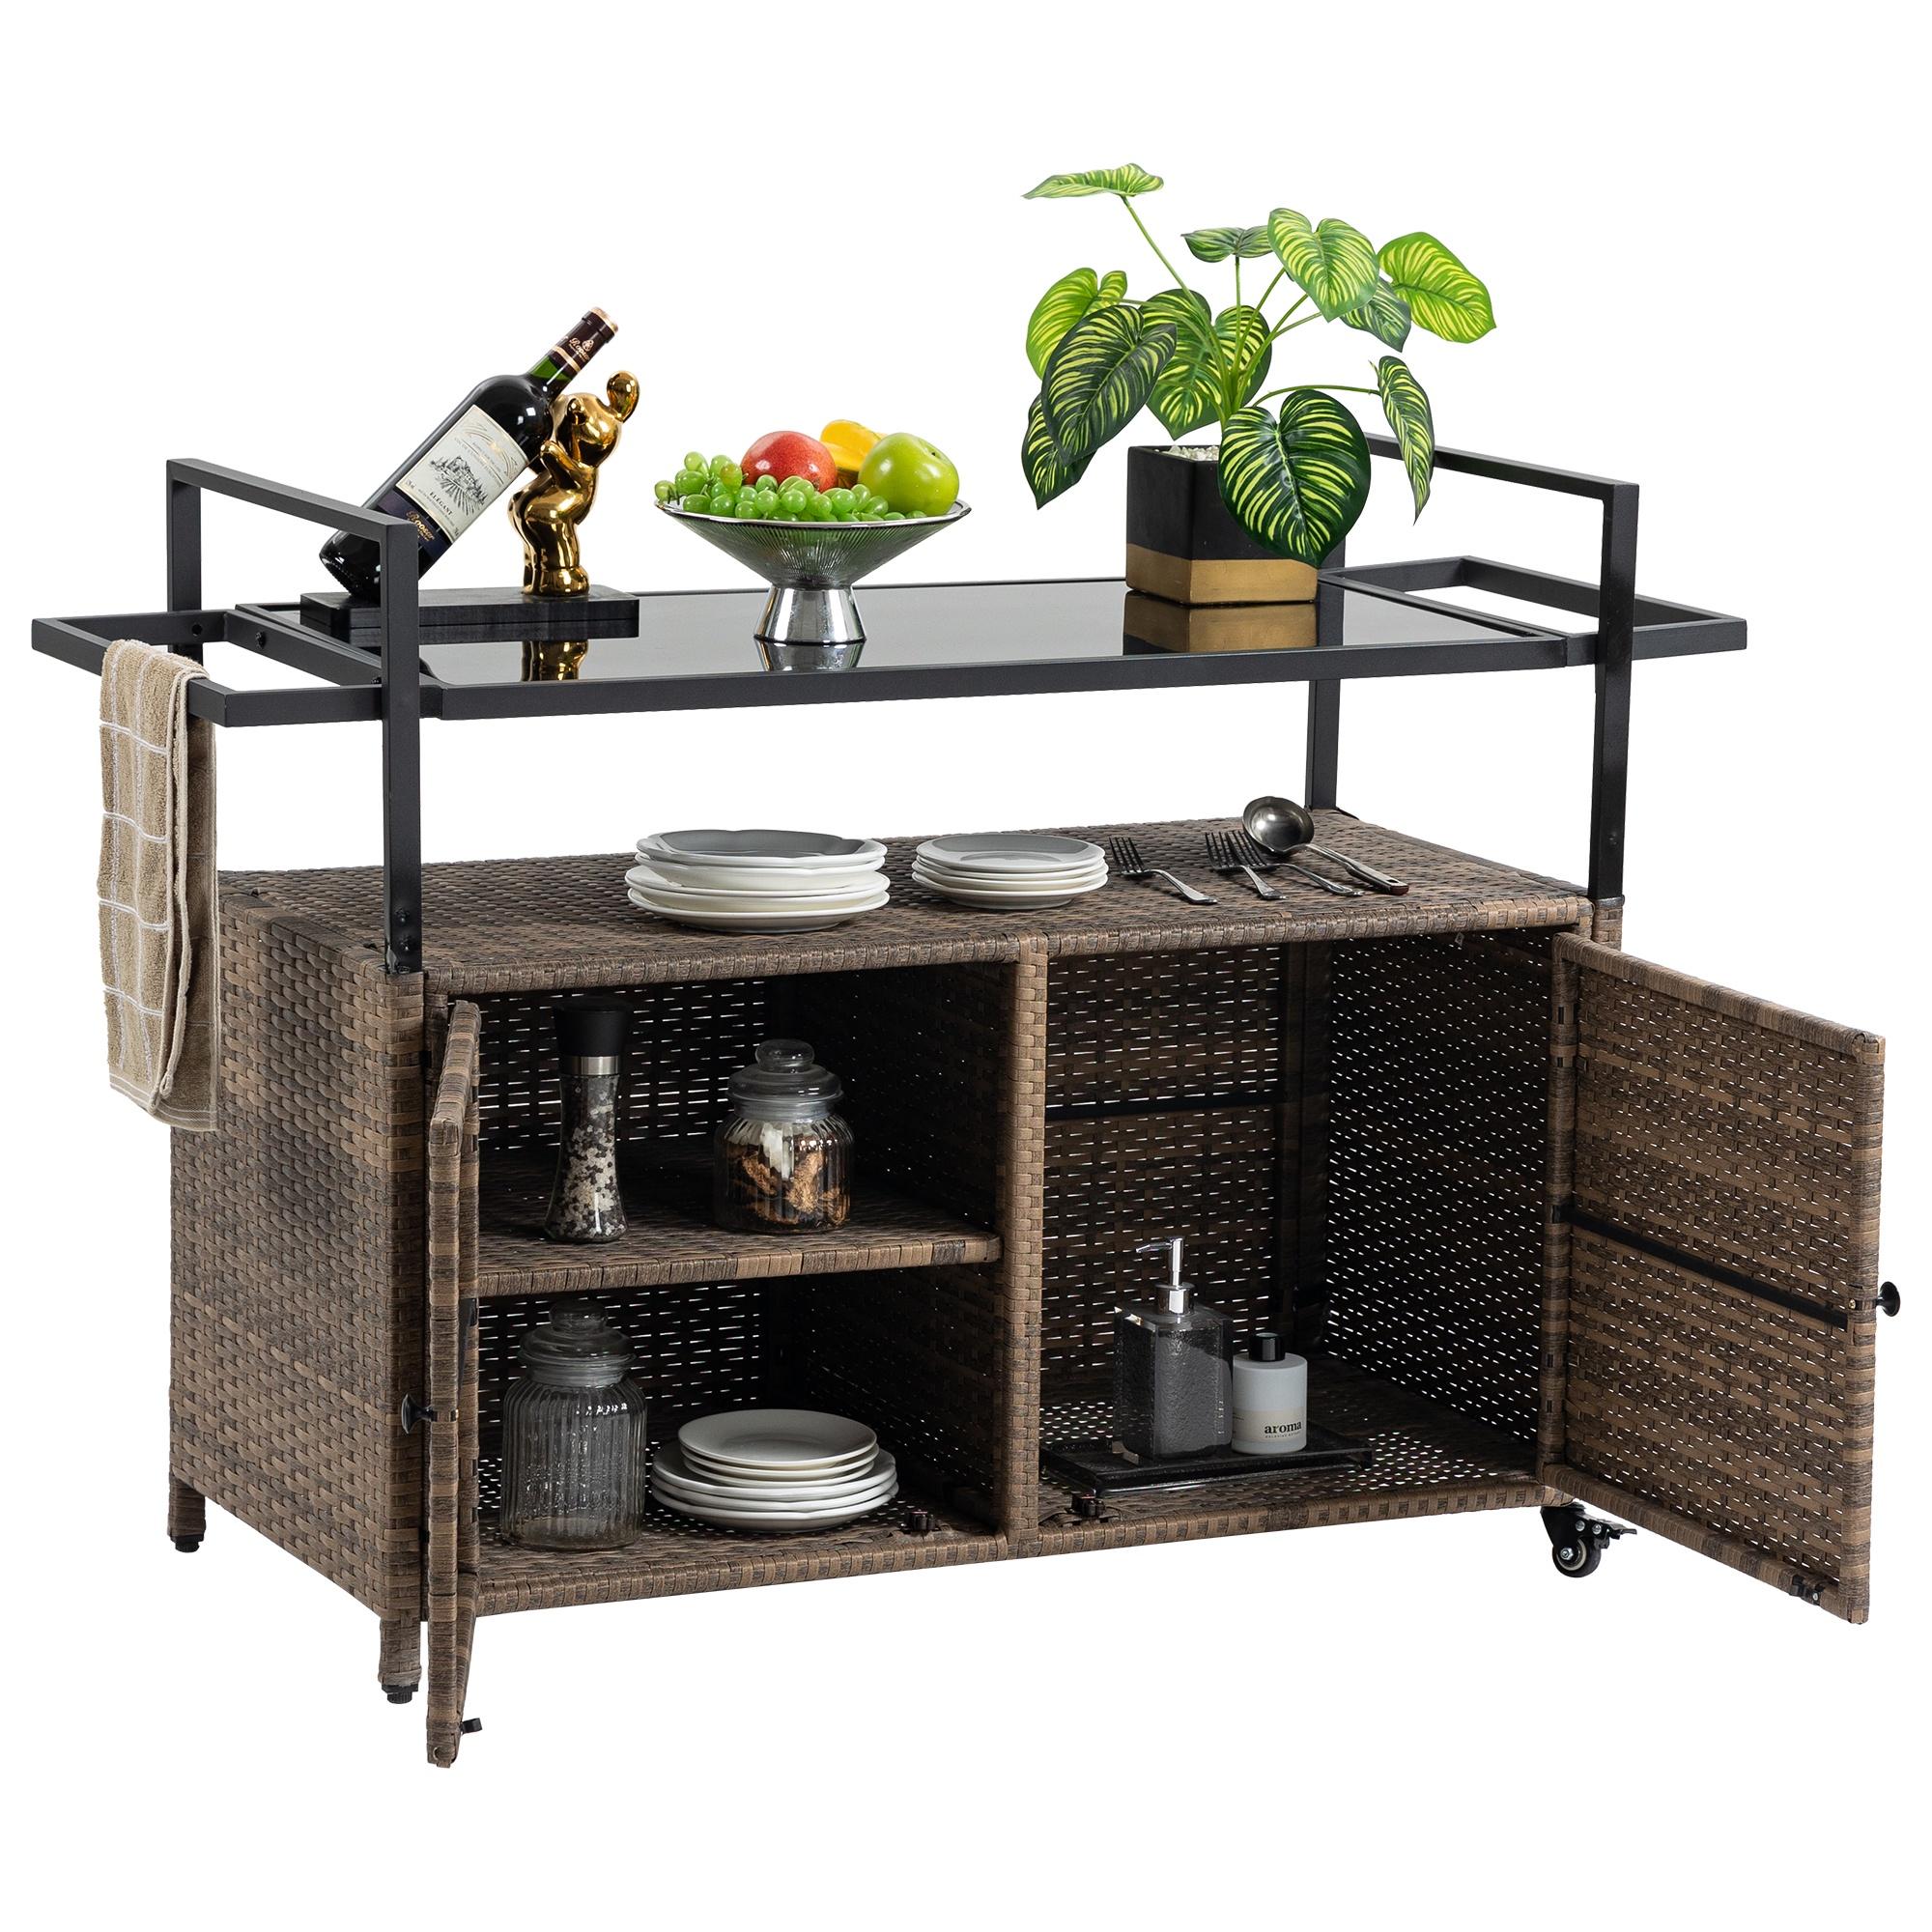 Syngar Patio Bar Cart on Wheels, Outdoor PE Wicker Bar Counter Table with Glass Top & Storage, Rolling Beverage Bar Counter Table, Wine Serving Cart for Garden, Porch, Backyard, Poolside, Light Brown - image 3 of 9